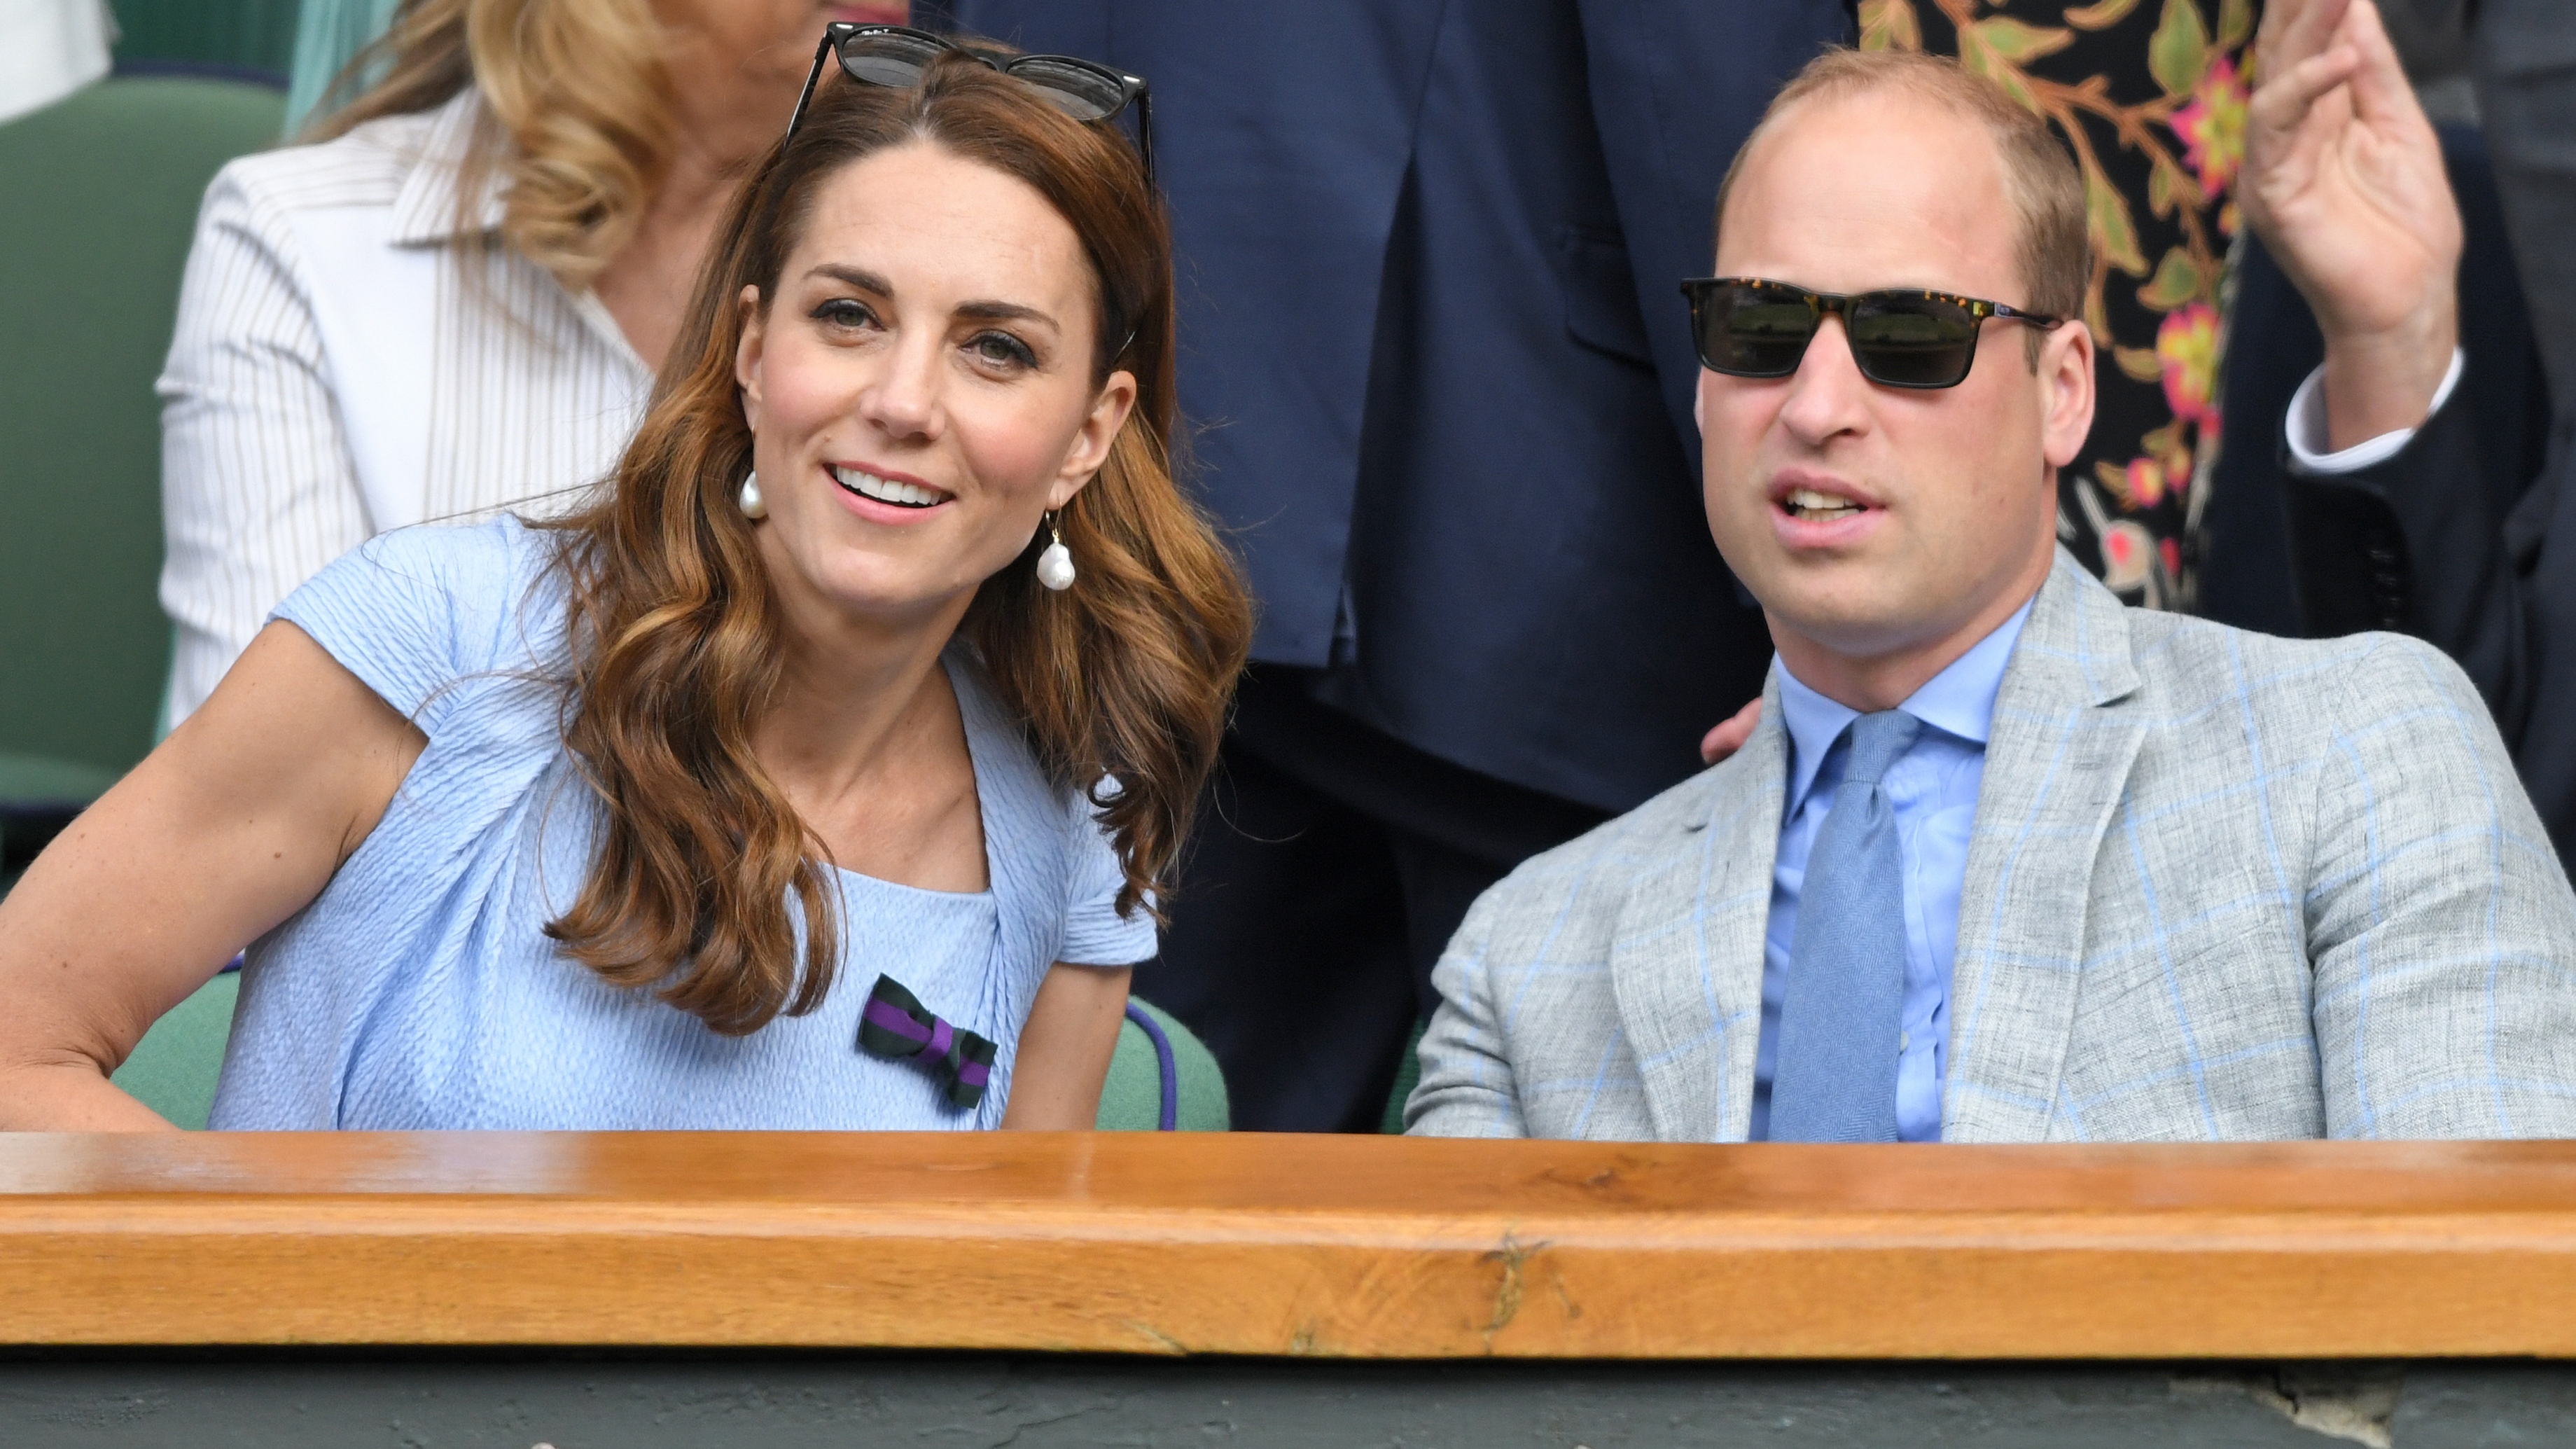 Who Is In The Wimbledon Royal Box Today?